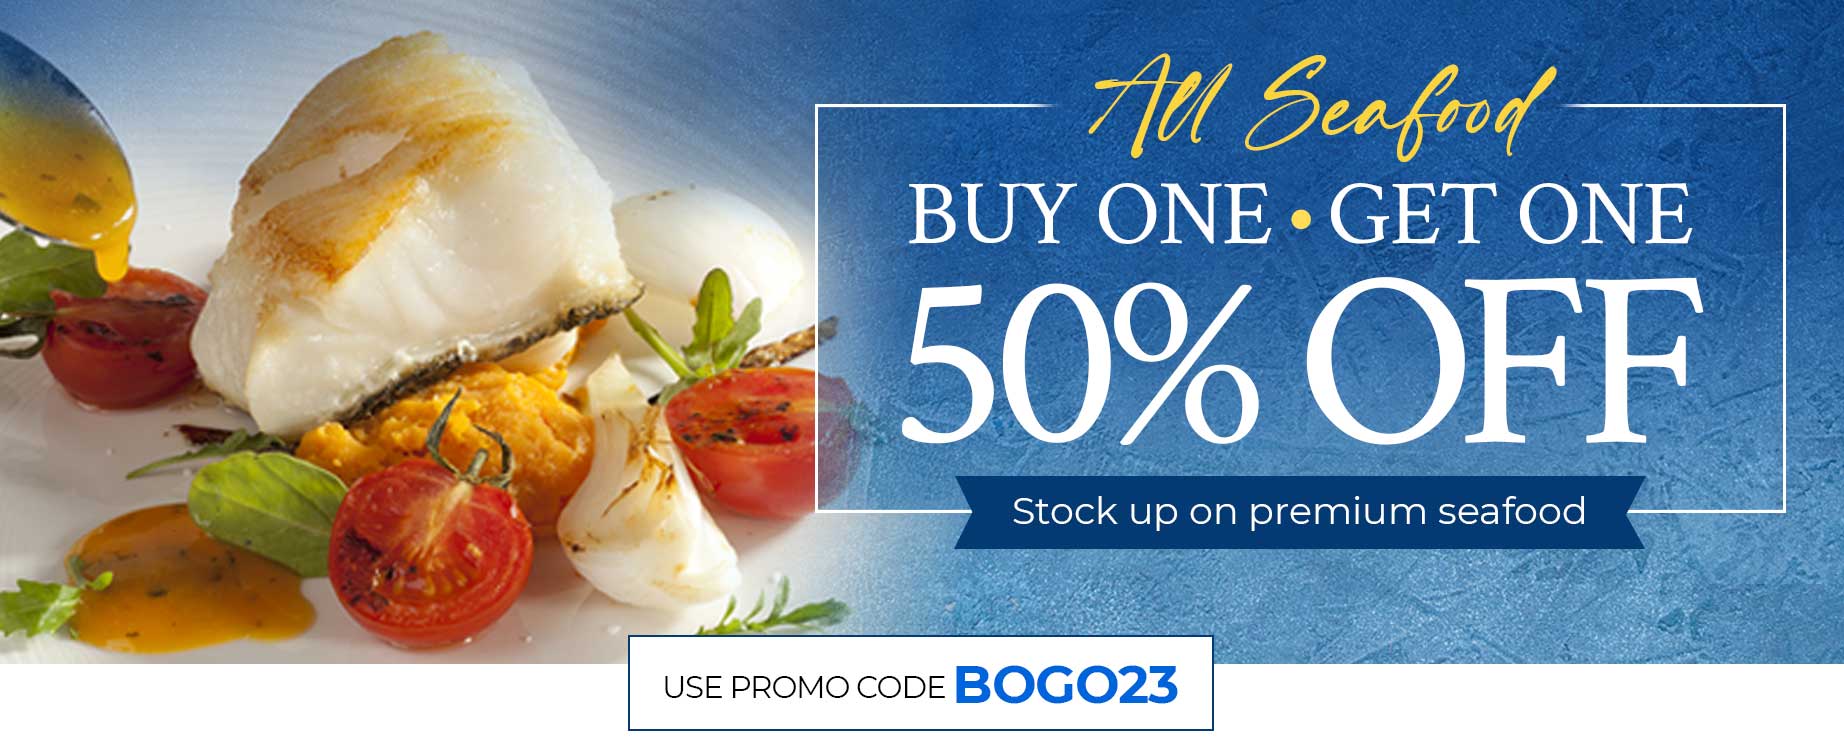 BOGO Sale - Buy One - Get One 50% Off - Buy One and get a second of the same item for 50% off. Use promo code BOGO23